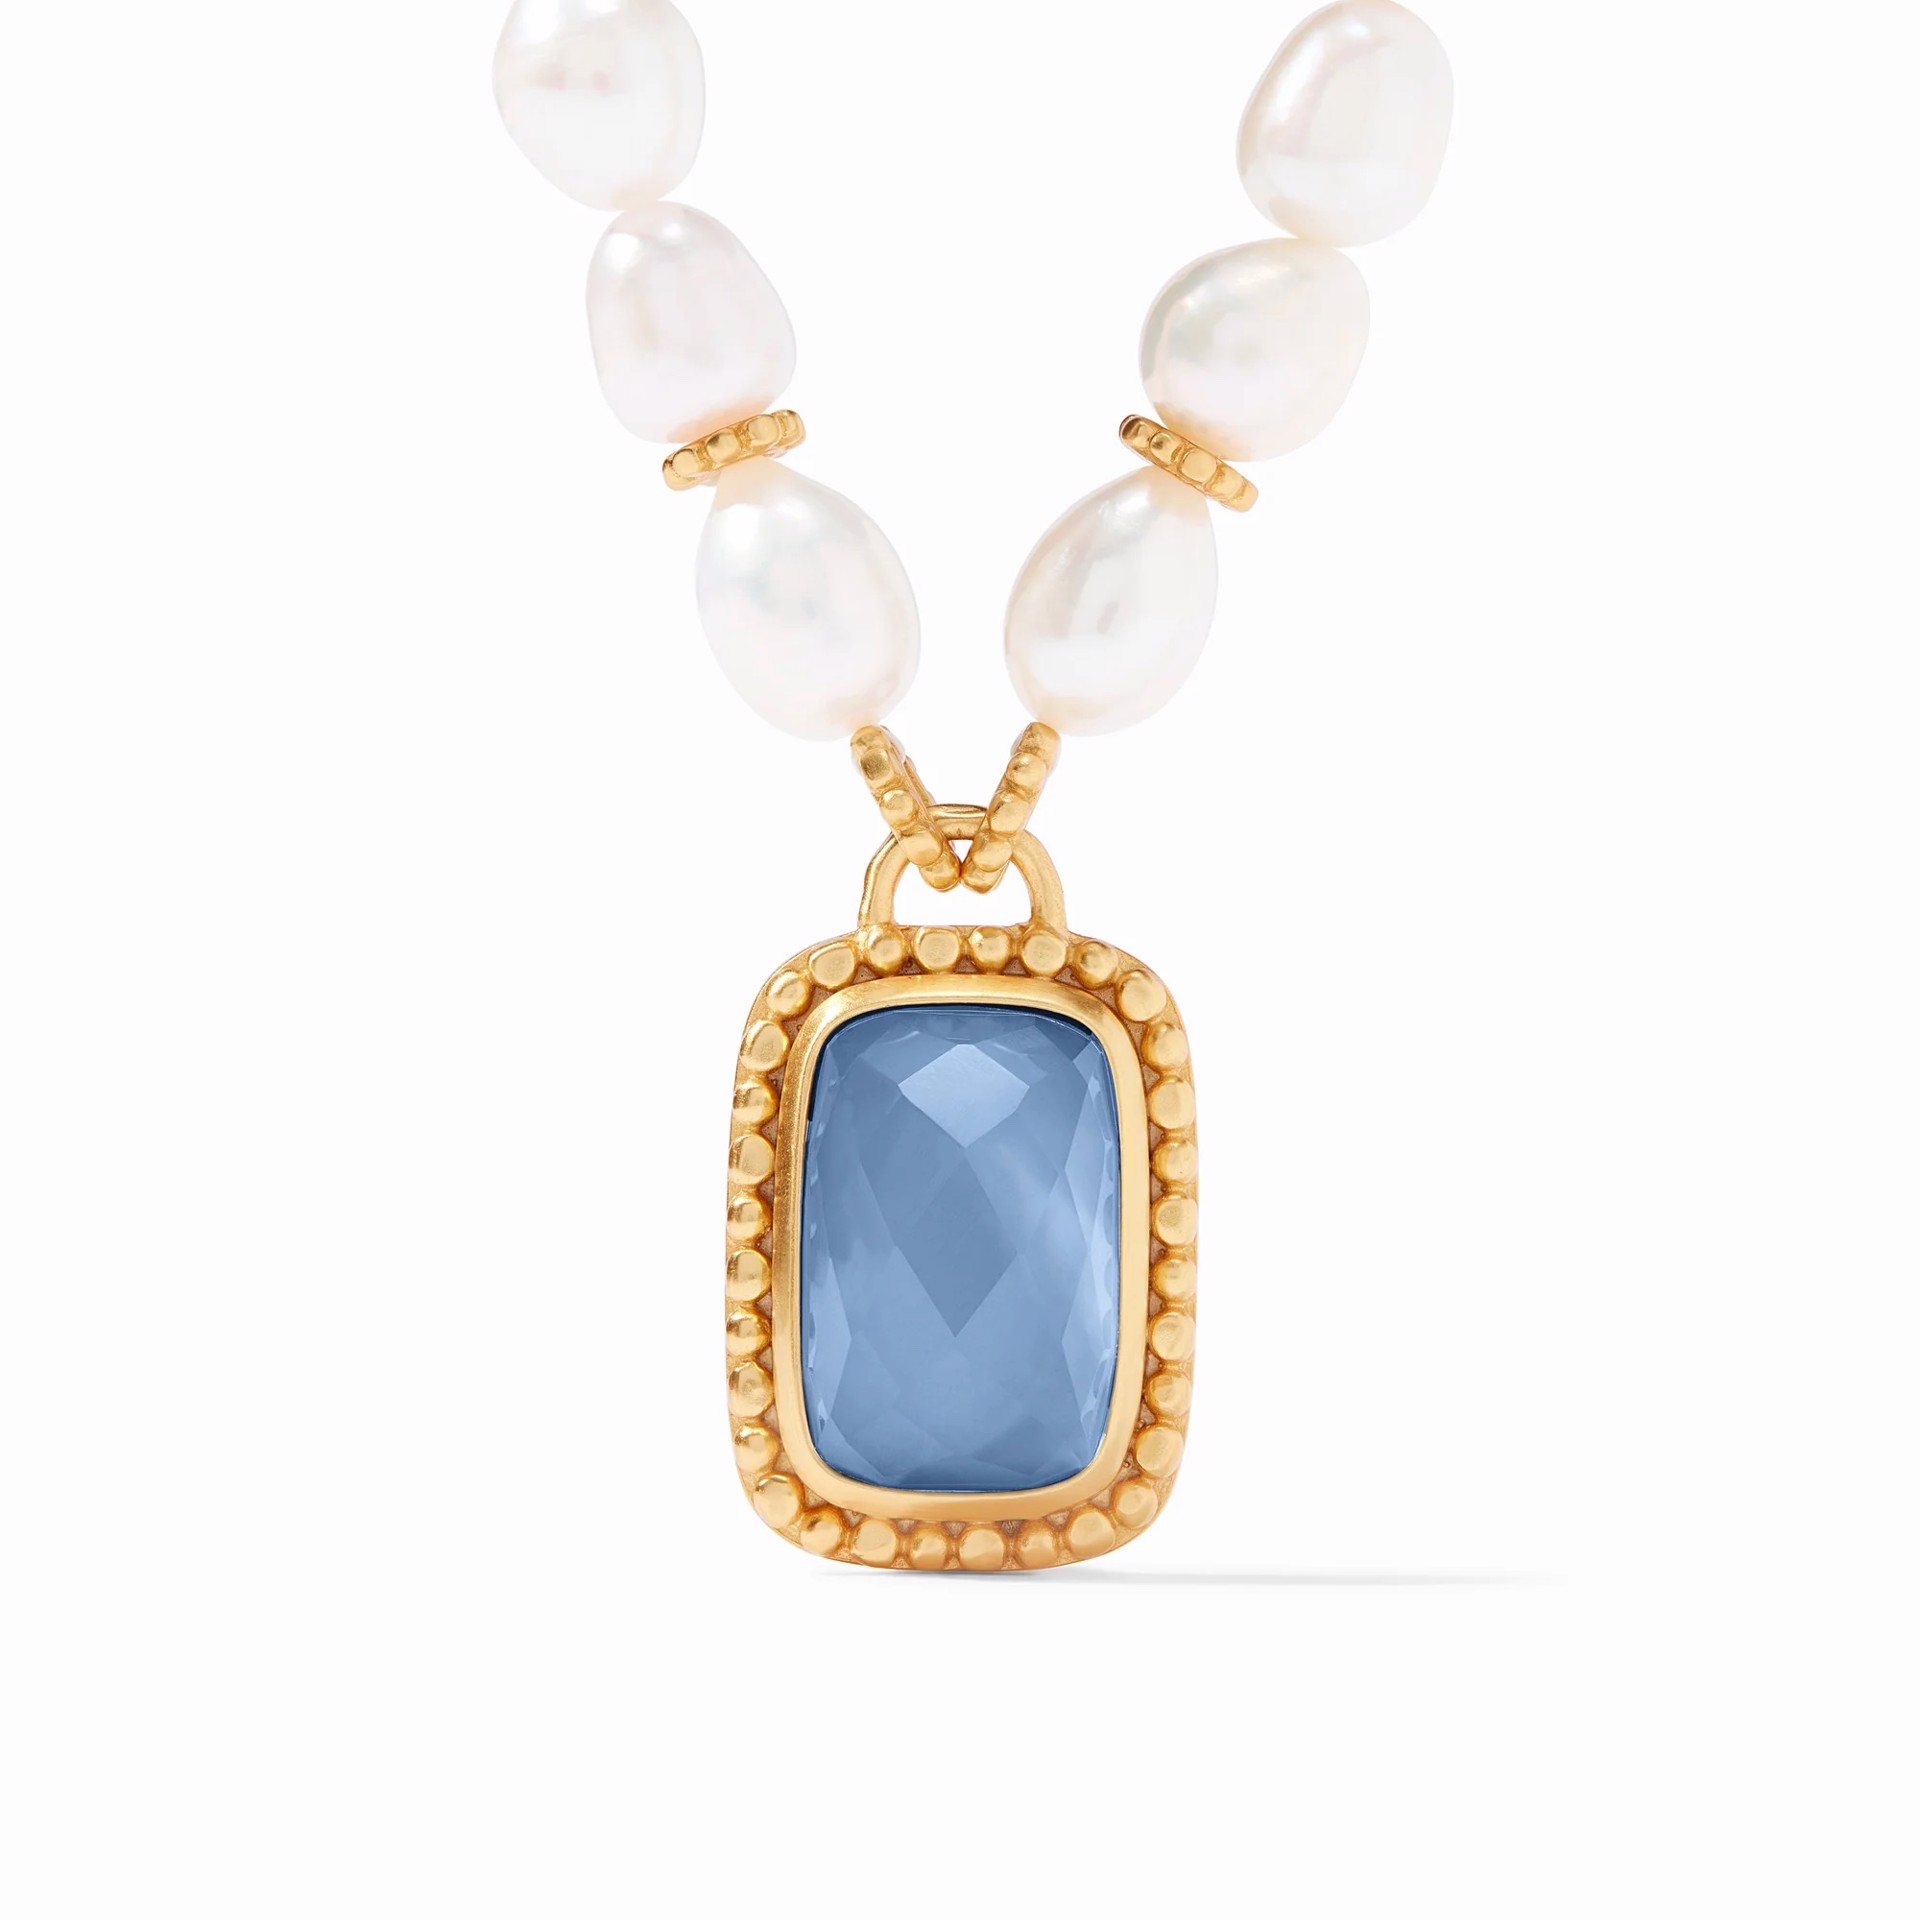 Marbella Statement Necklace - Chalcedony Blue by Julie Vos